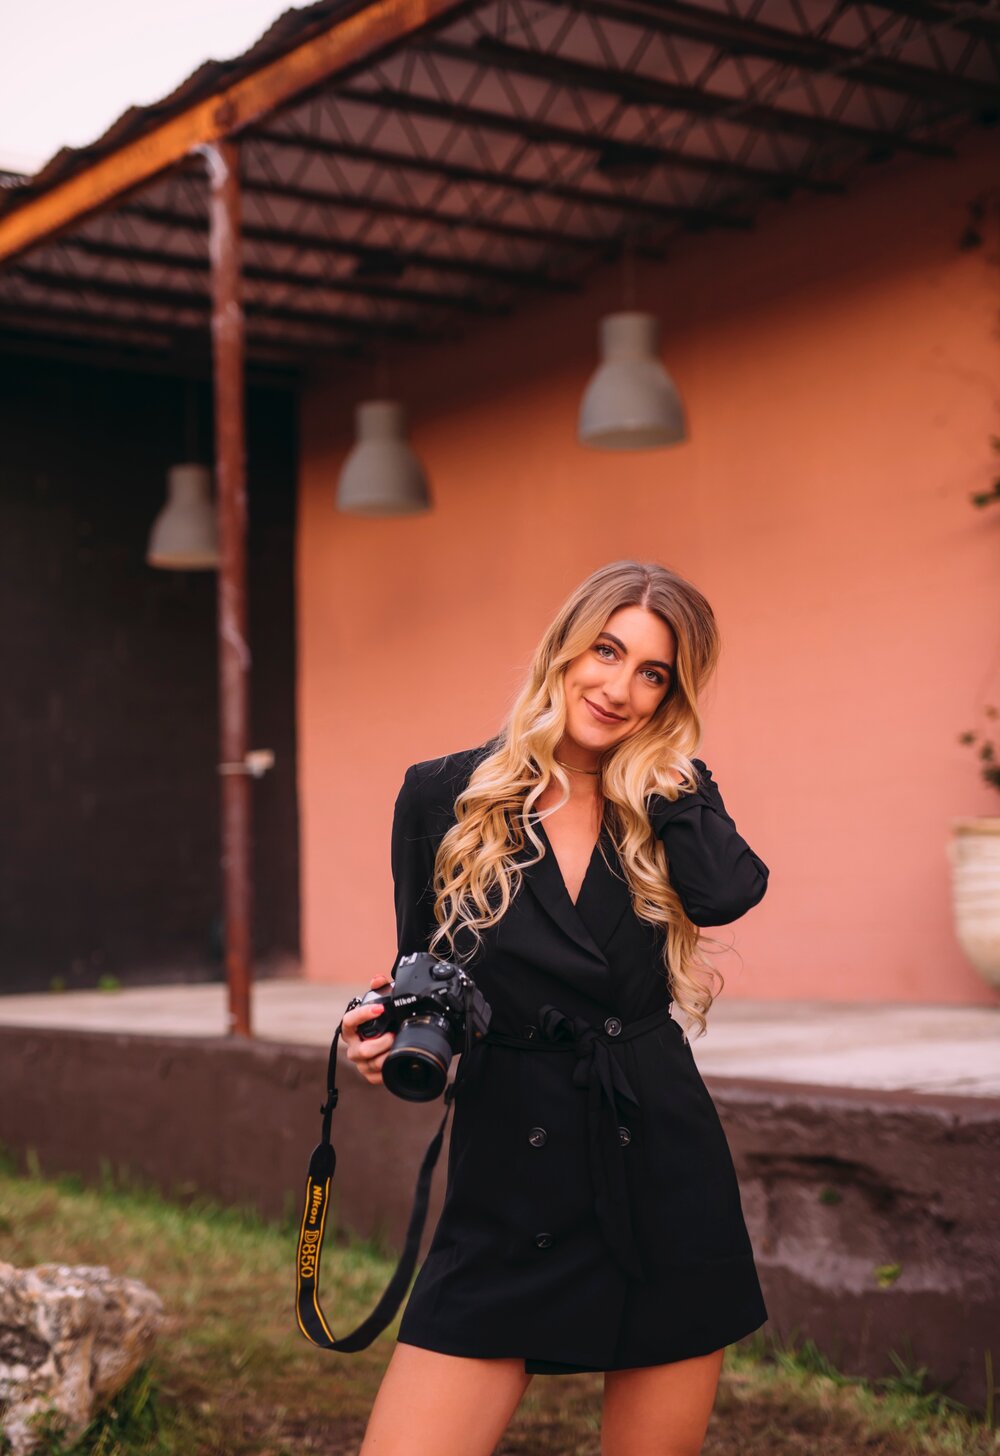 Shelby Henry: Owner, Lead Photographer and Videographer